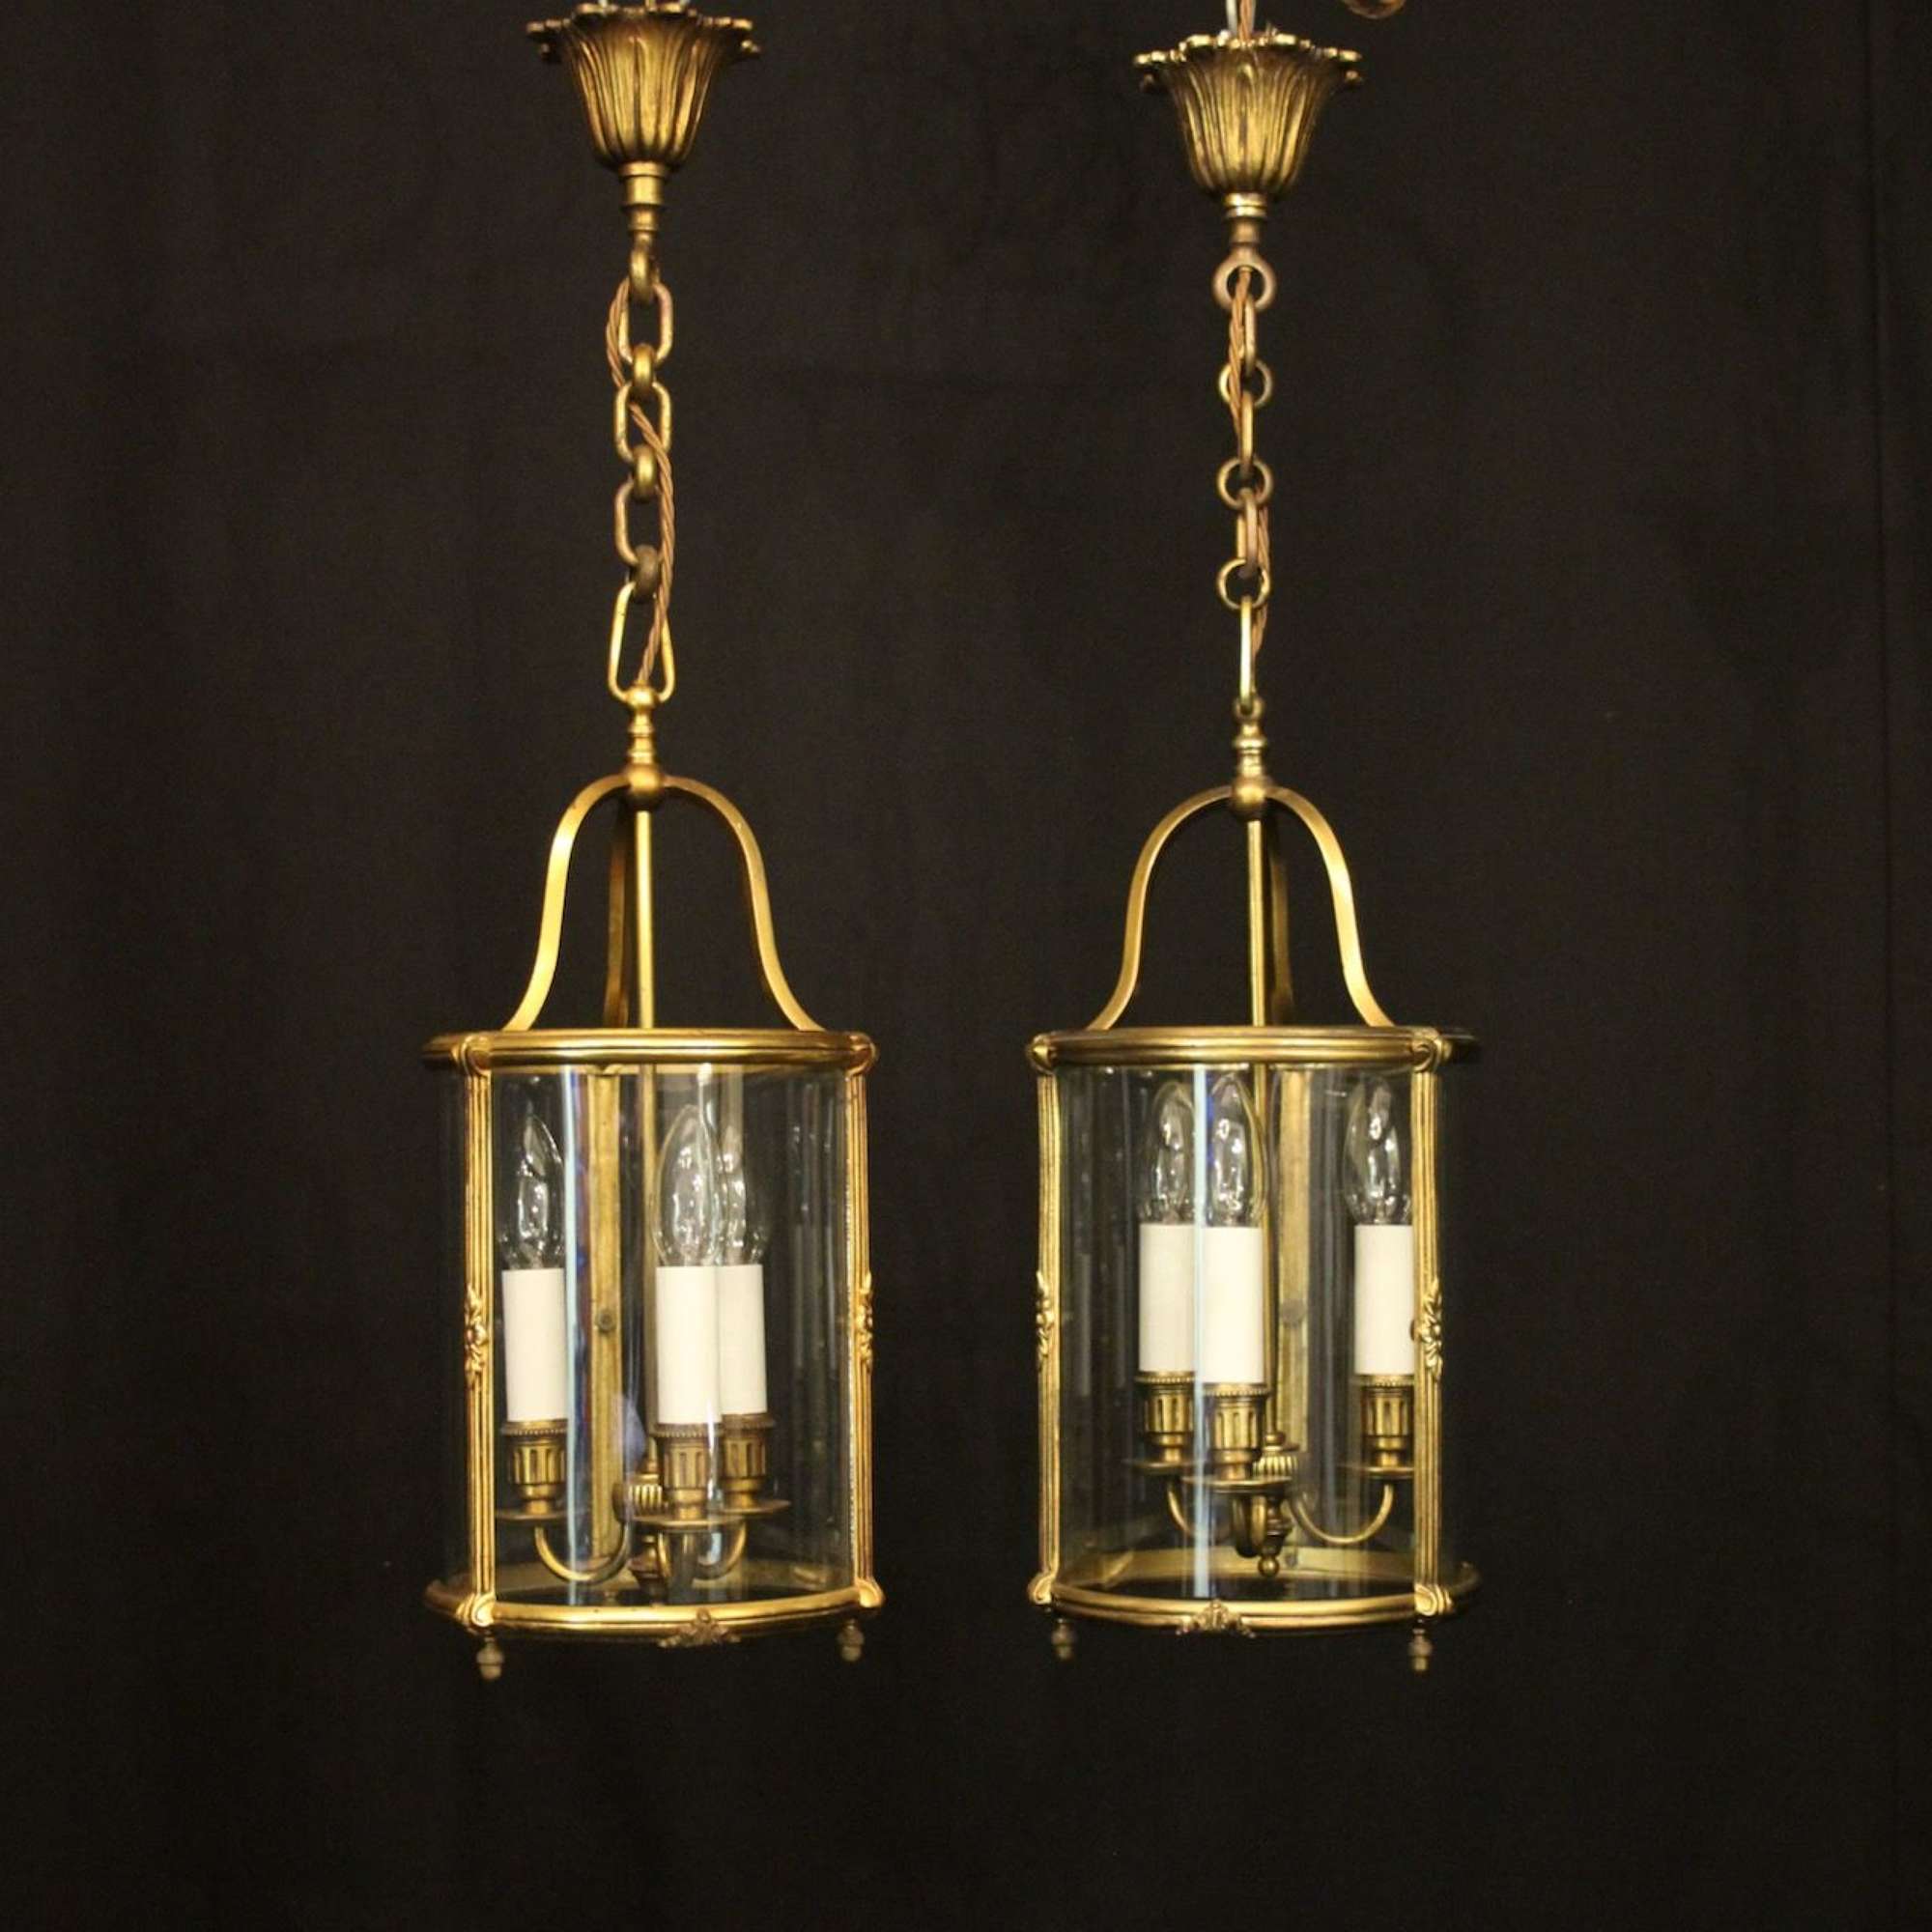 French Pair Of Gilded Antique Hall Lanterns